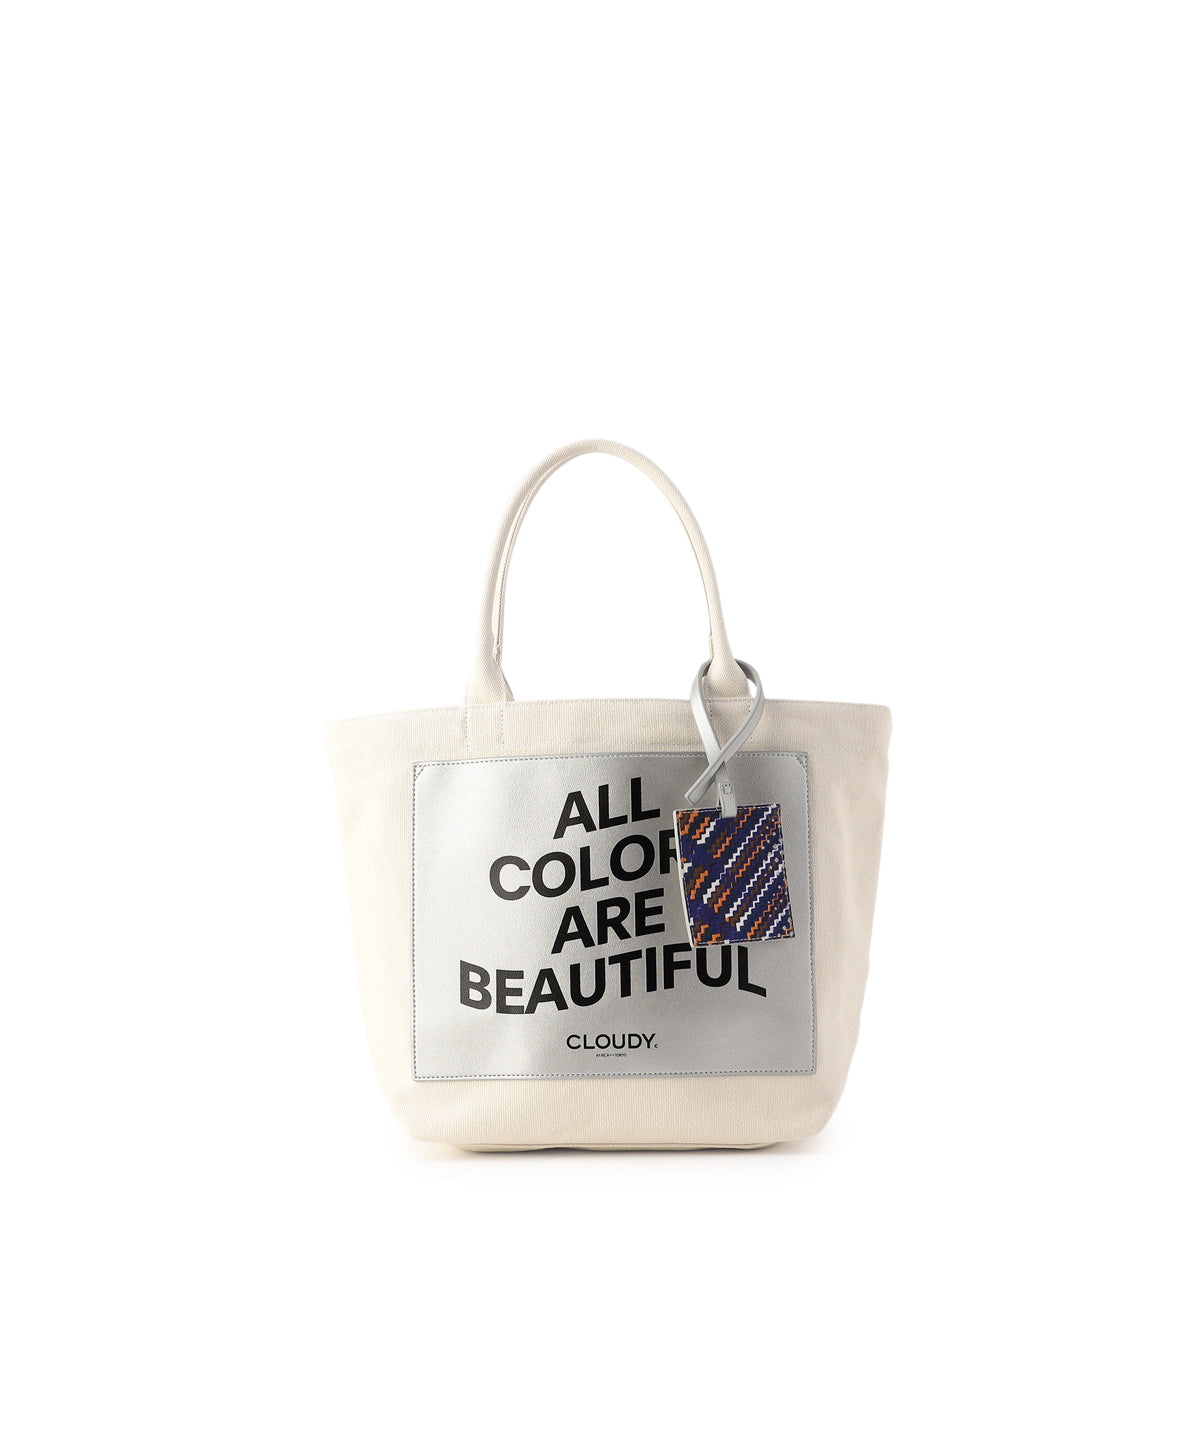 Recycled Canvas Tote (Medium) SAX | バッグ | CLOUDY公式通販サイト